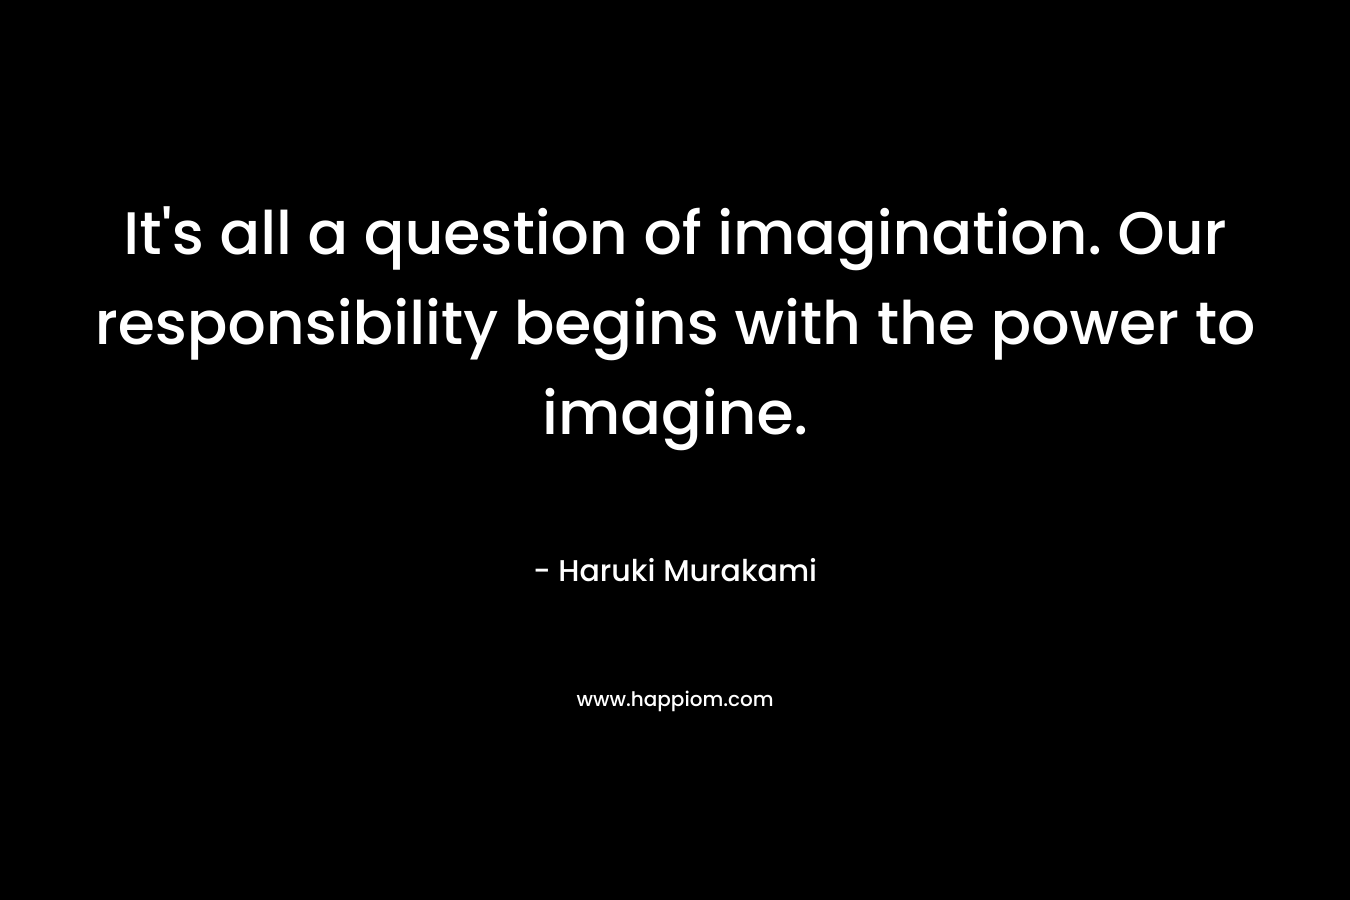 It's all a question of imagination. Our responsibility begins with the power to imagine.